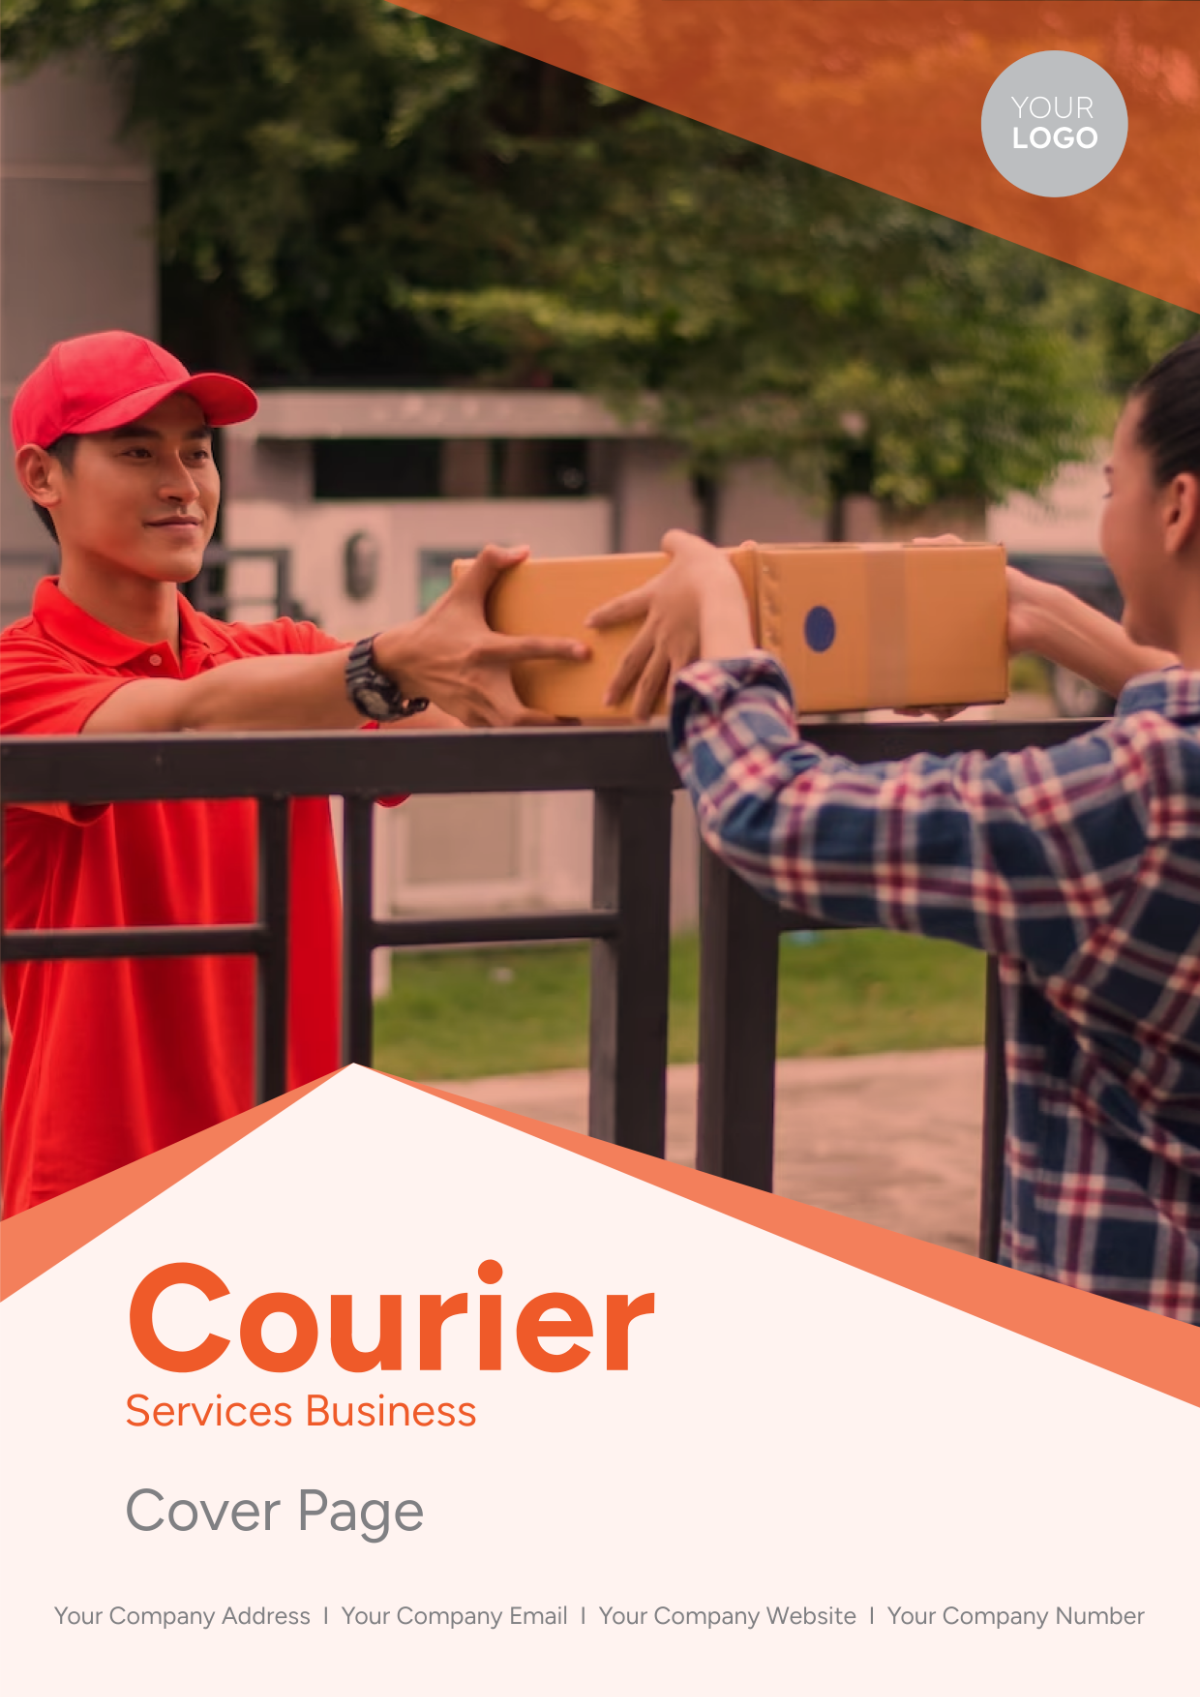 Courier Services Business Cover Page